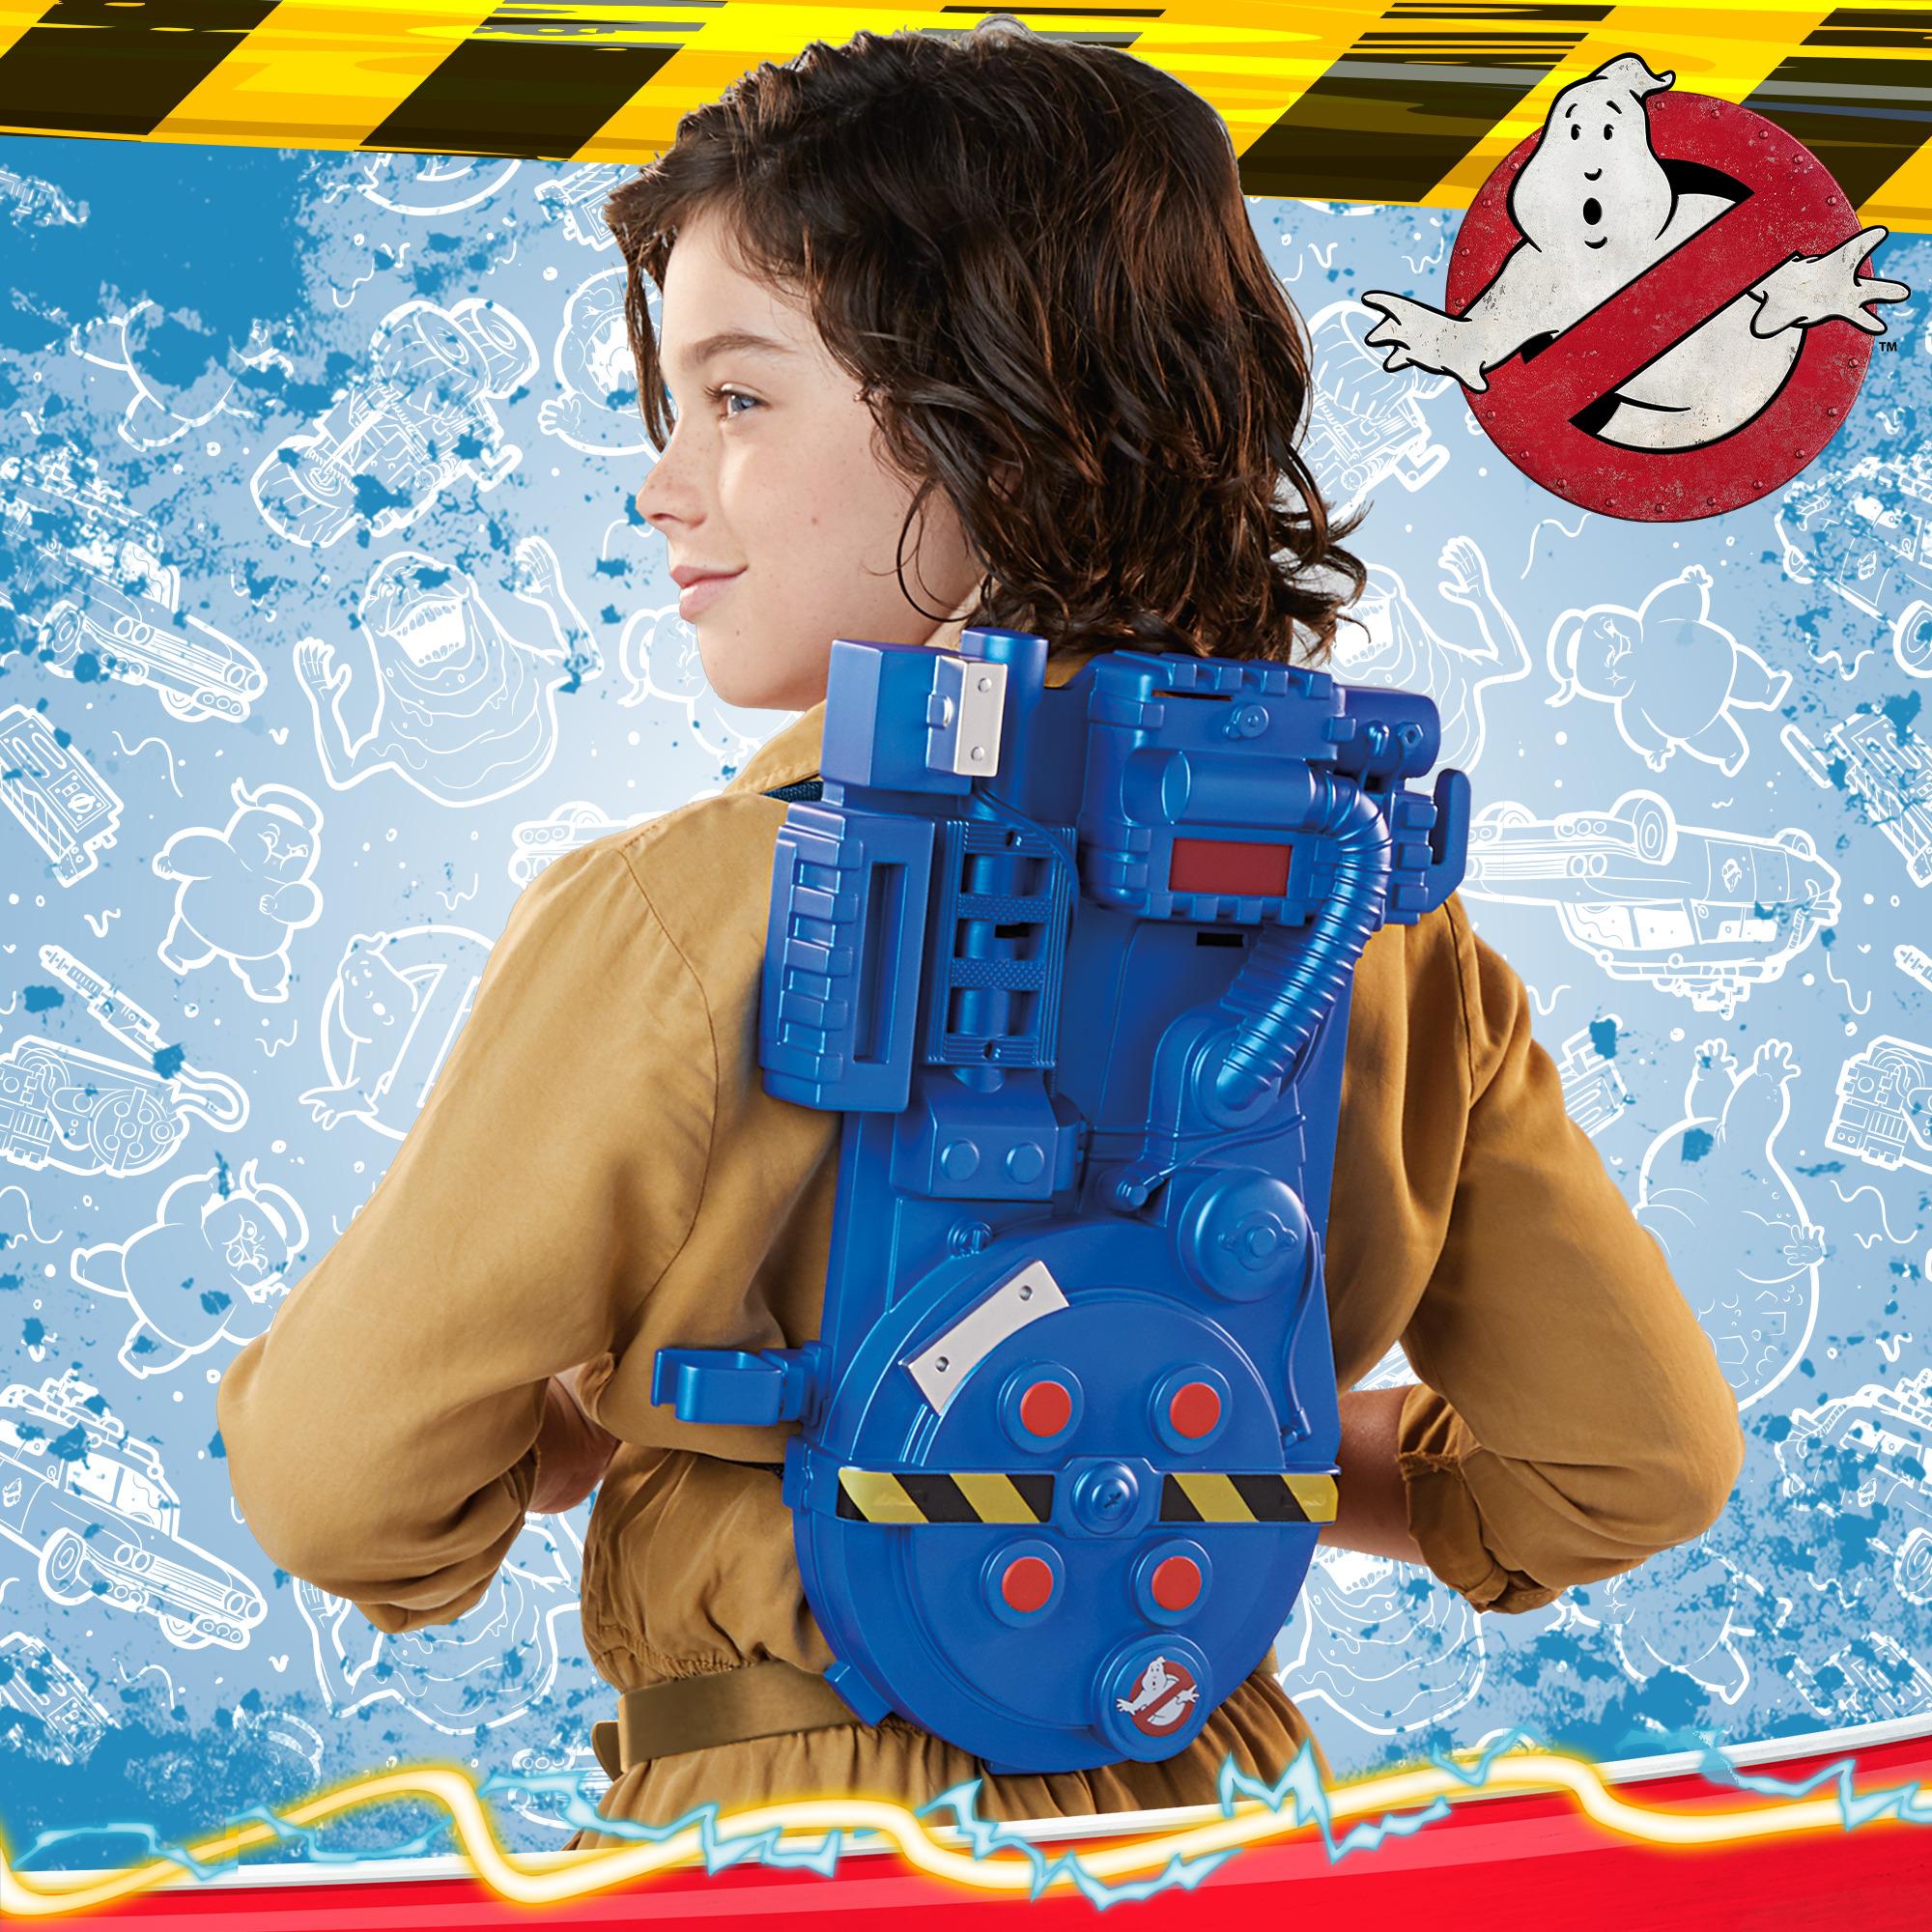 Ghostbusters Movie Proton Pack Roleplay Toy Cosplay Classic Blue Gear ... Ghostbusters Toy